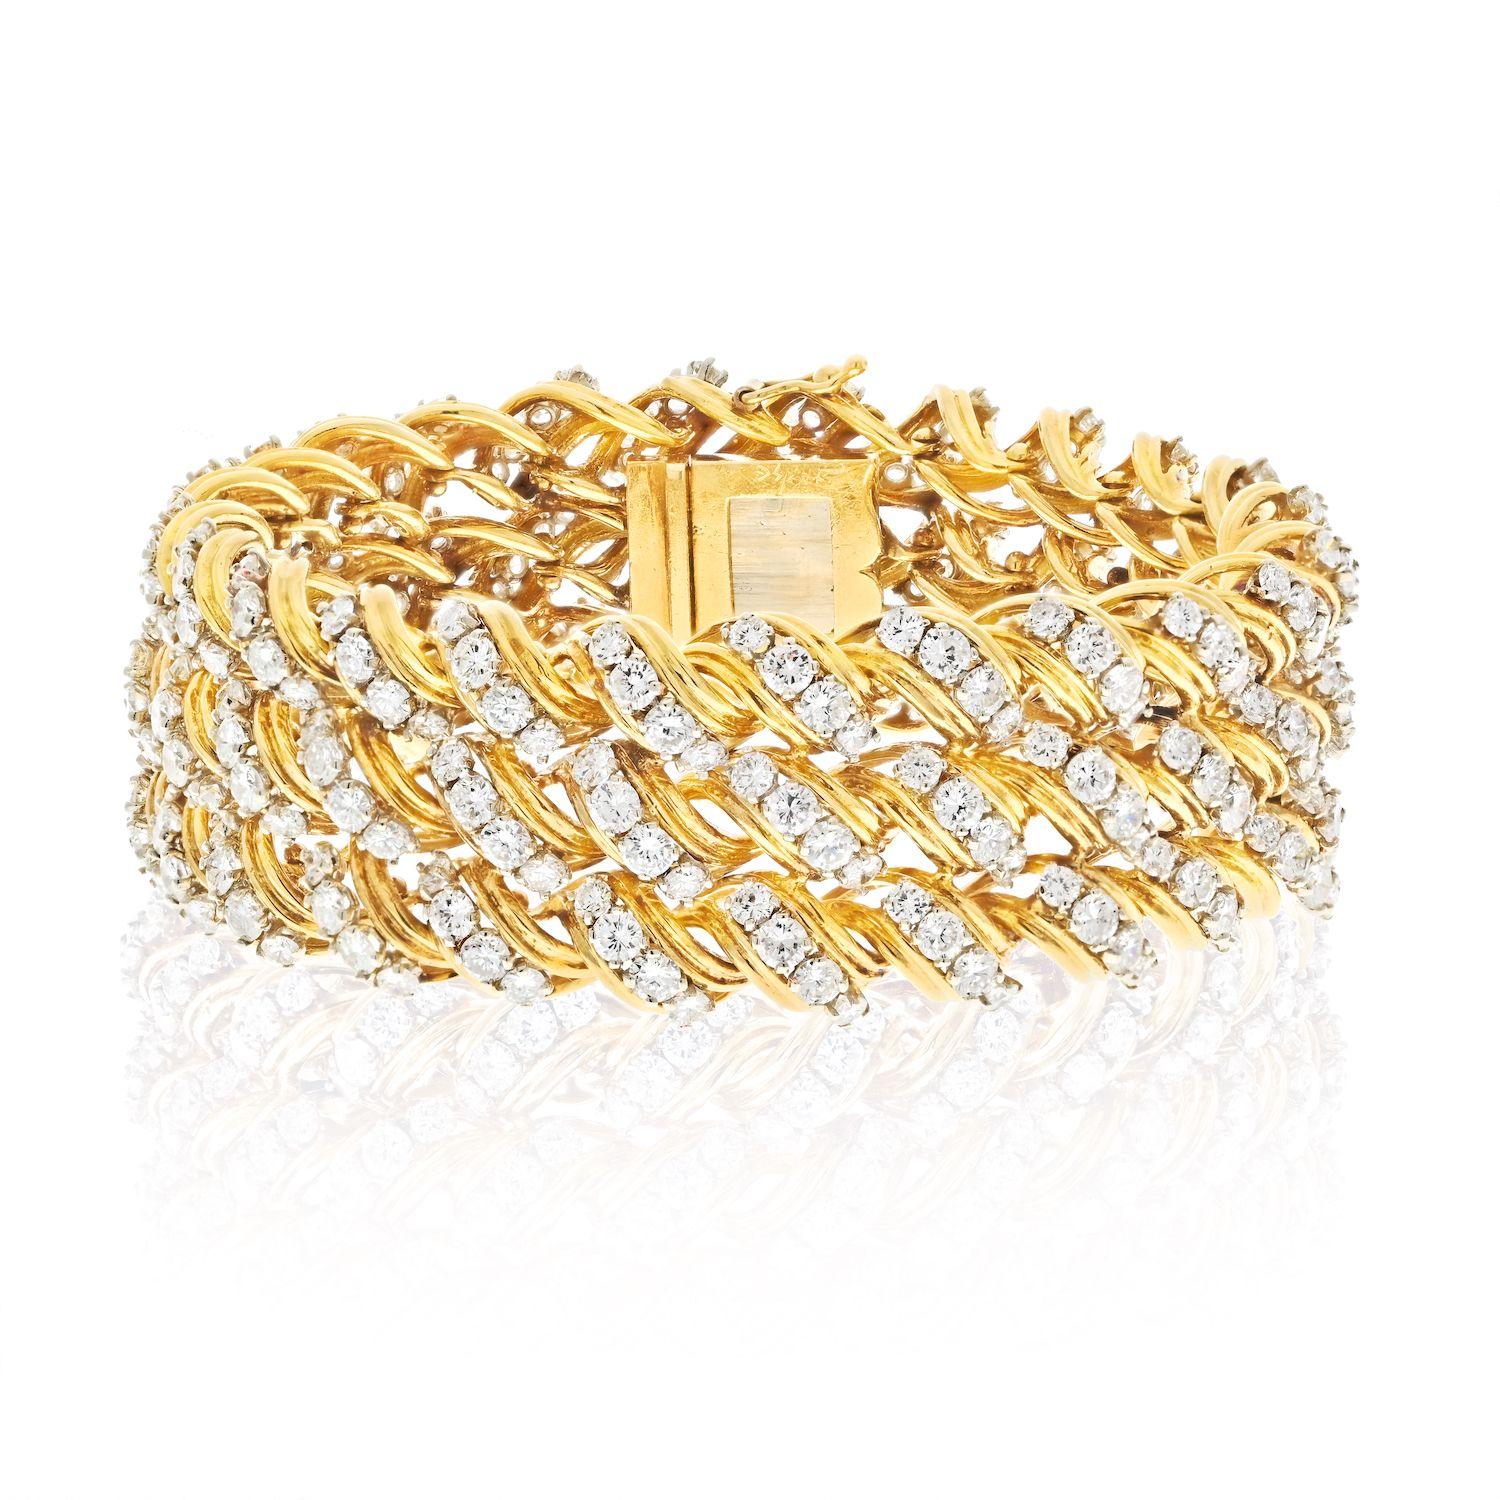 This 18k yellow gold bracelet from the 1970s is a true masterpiece of jewelry craftsmanship. The twisted rows of wire gold give the bracelet a unique texture and the addition of round cut diamonds set into the gold further enhances its beauty. With